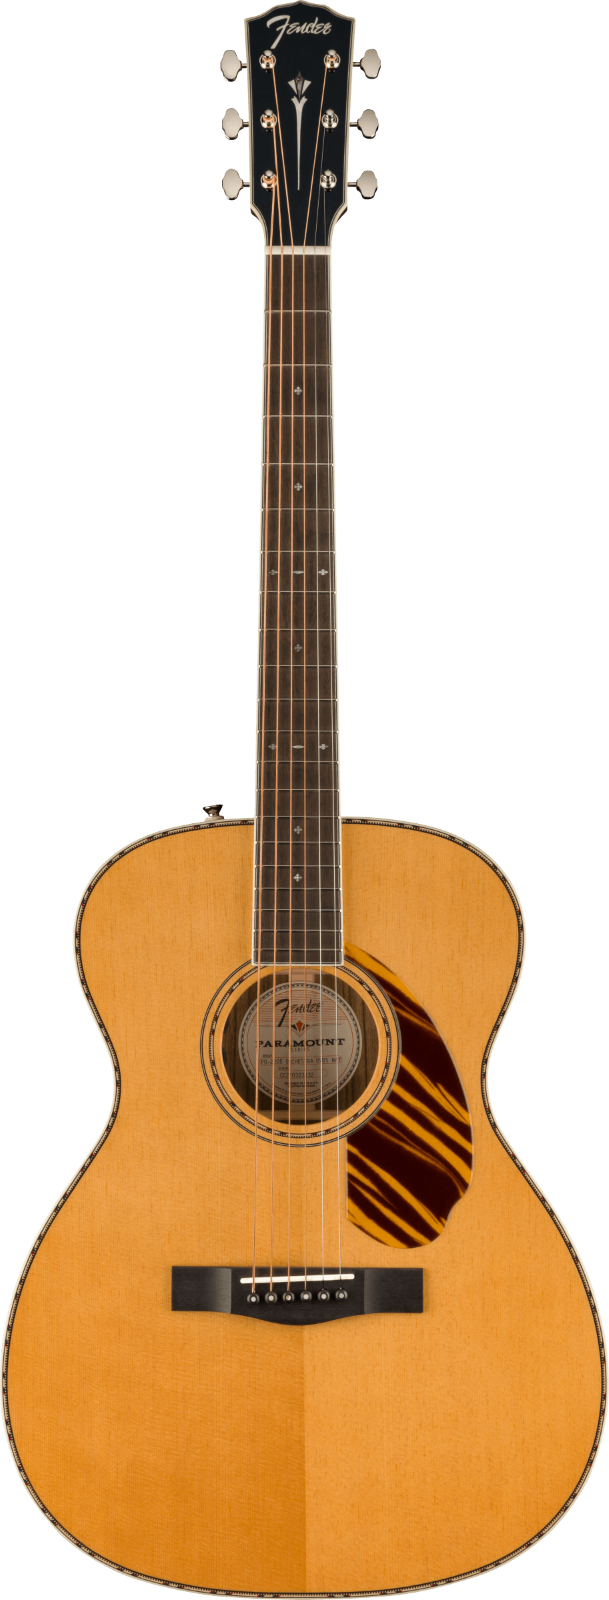 Fender LIMITED EDITION PO-220E ORCHESTRA, AGED NATURAL : photo 1